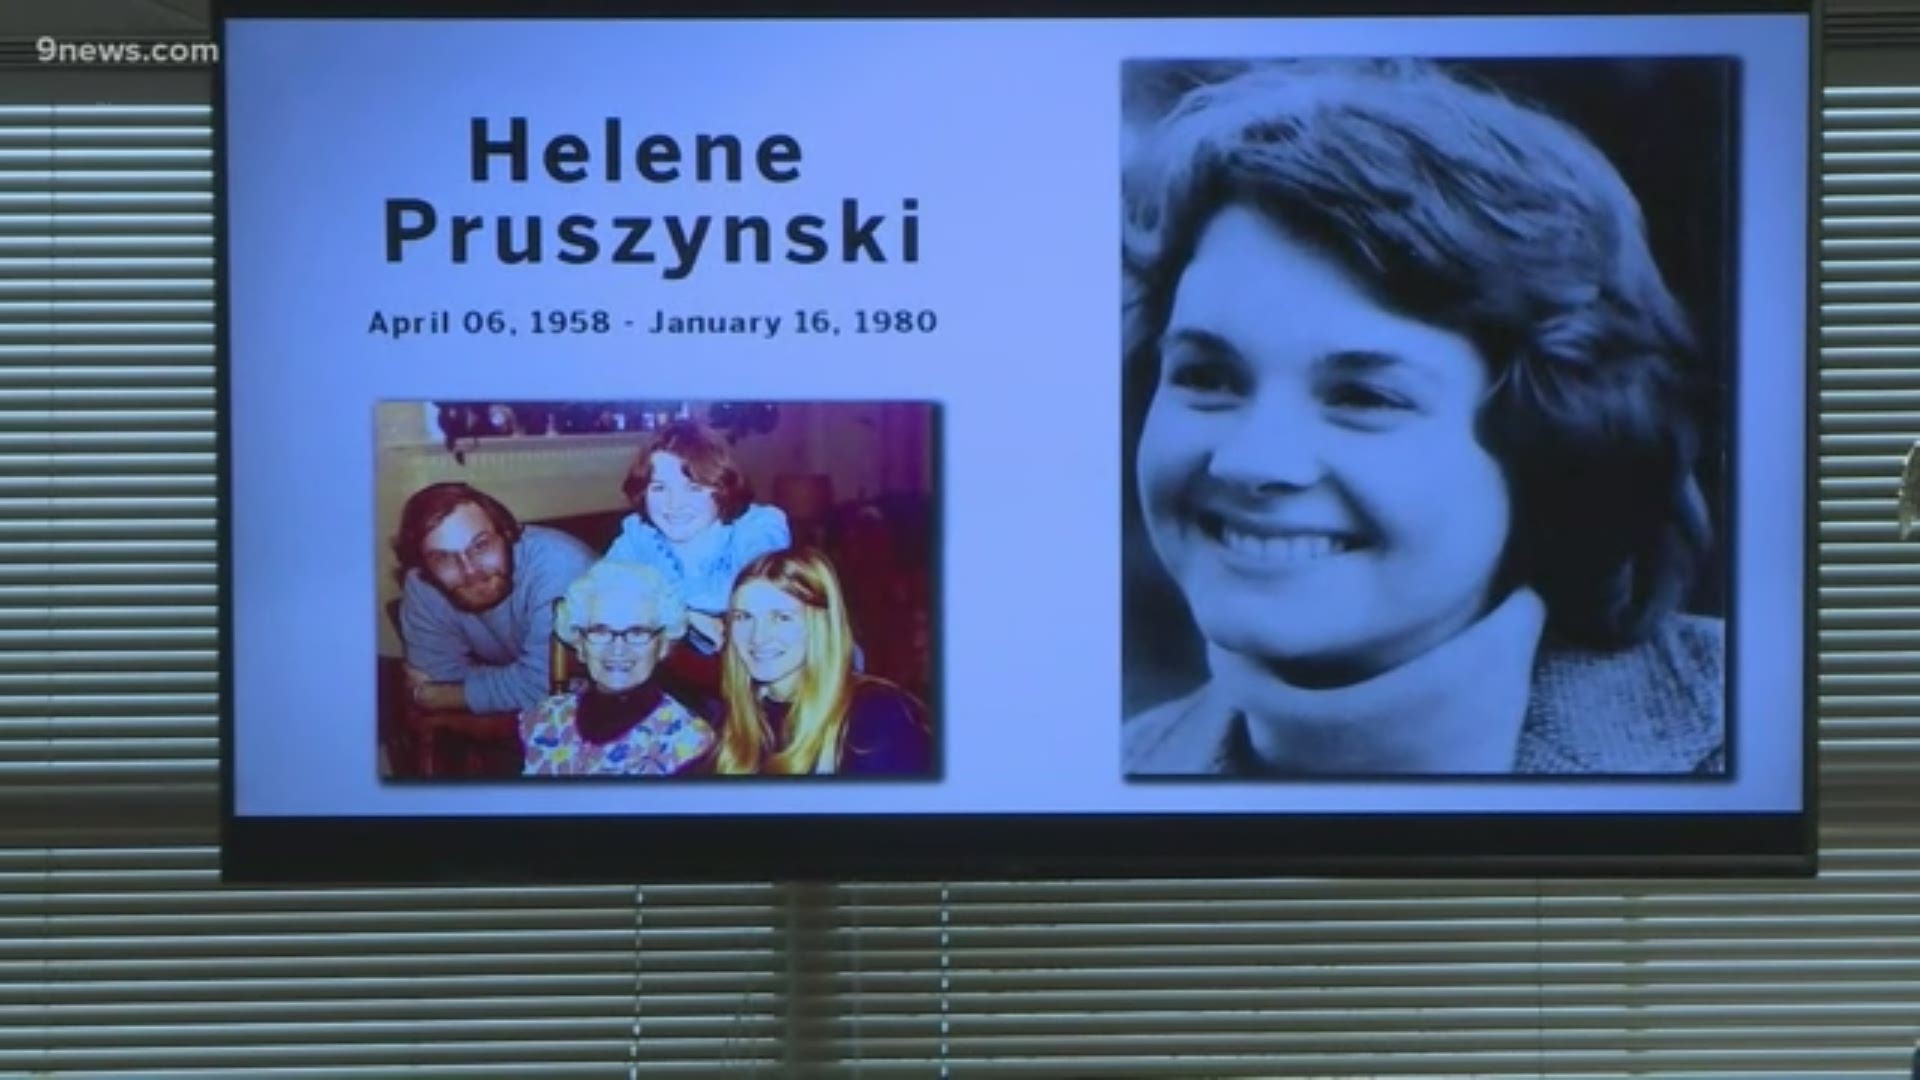 Douglas County sheriff's investigators, using a new tool known as "genetic genealogy," have arrested a Florida man in the 1980 rape and murder of Helene Pruszynski.